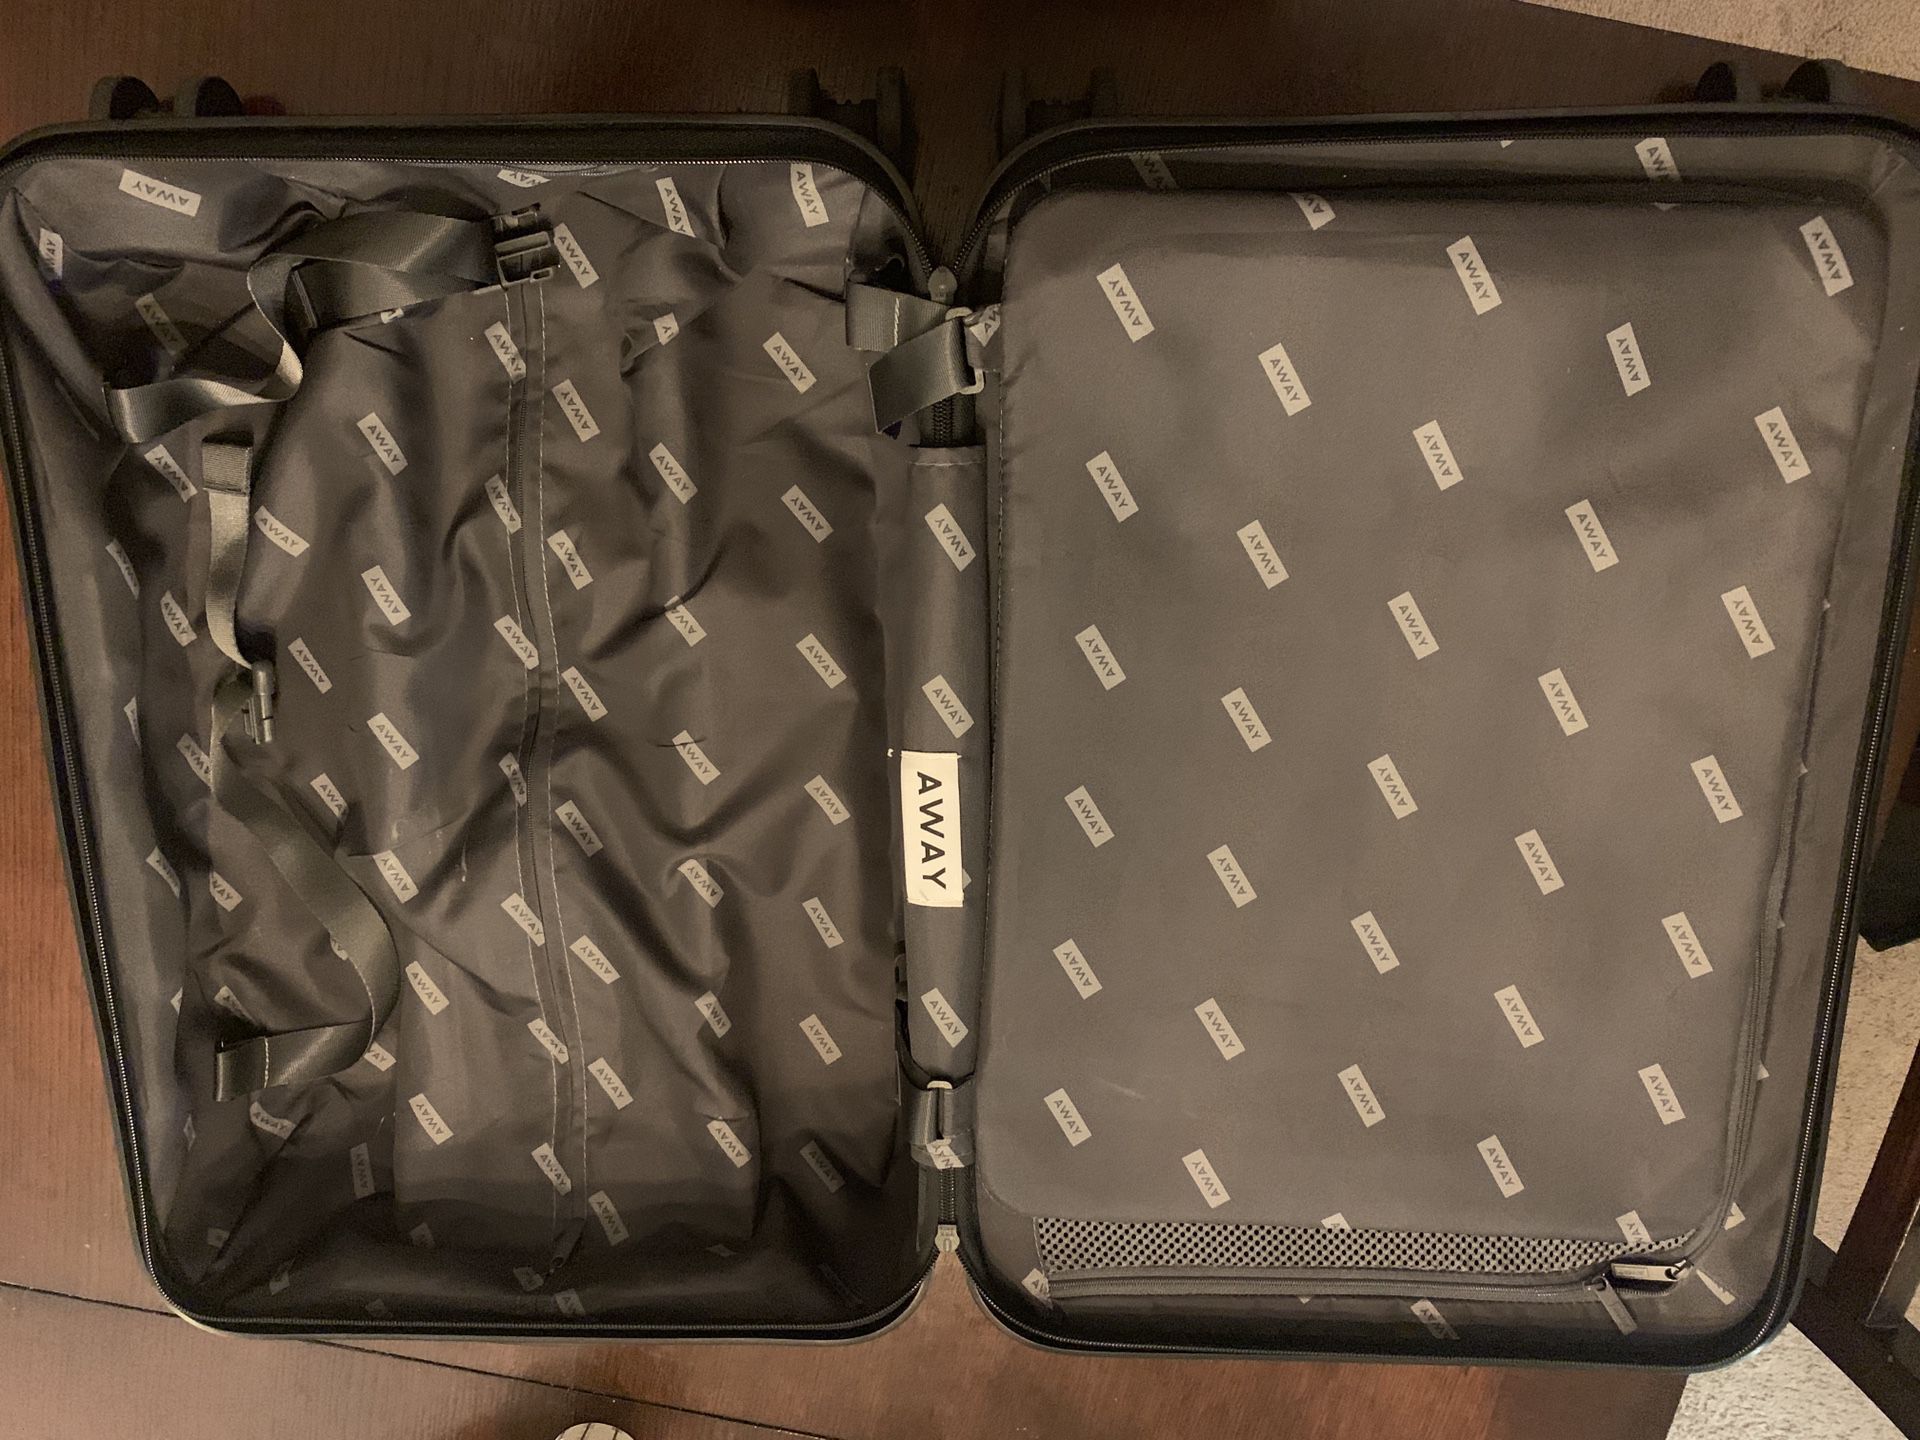 Away Luggage For Sale for Sale in Los Angeles, CA - OfferUp